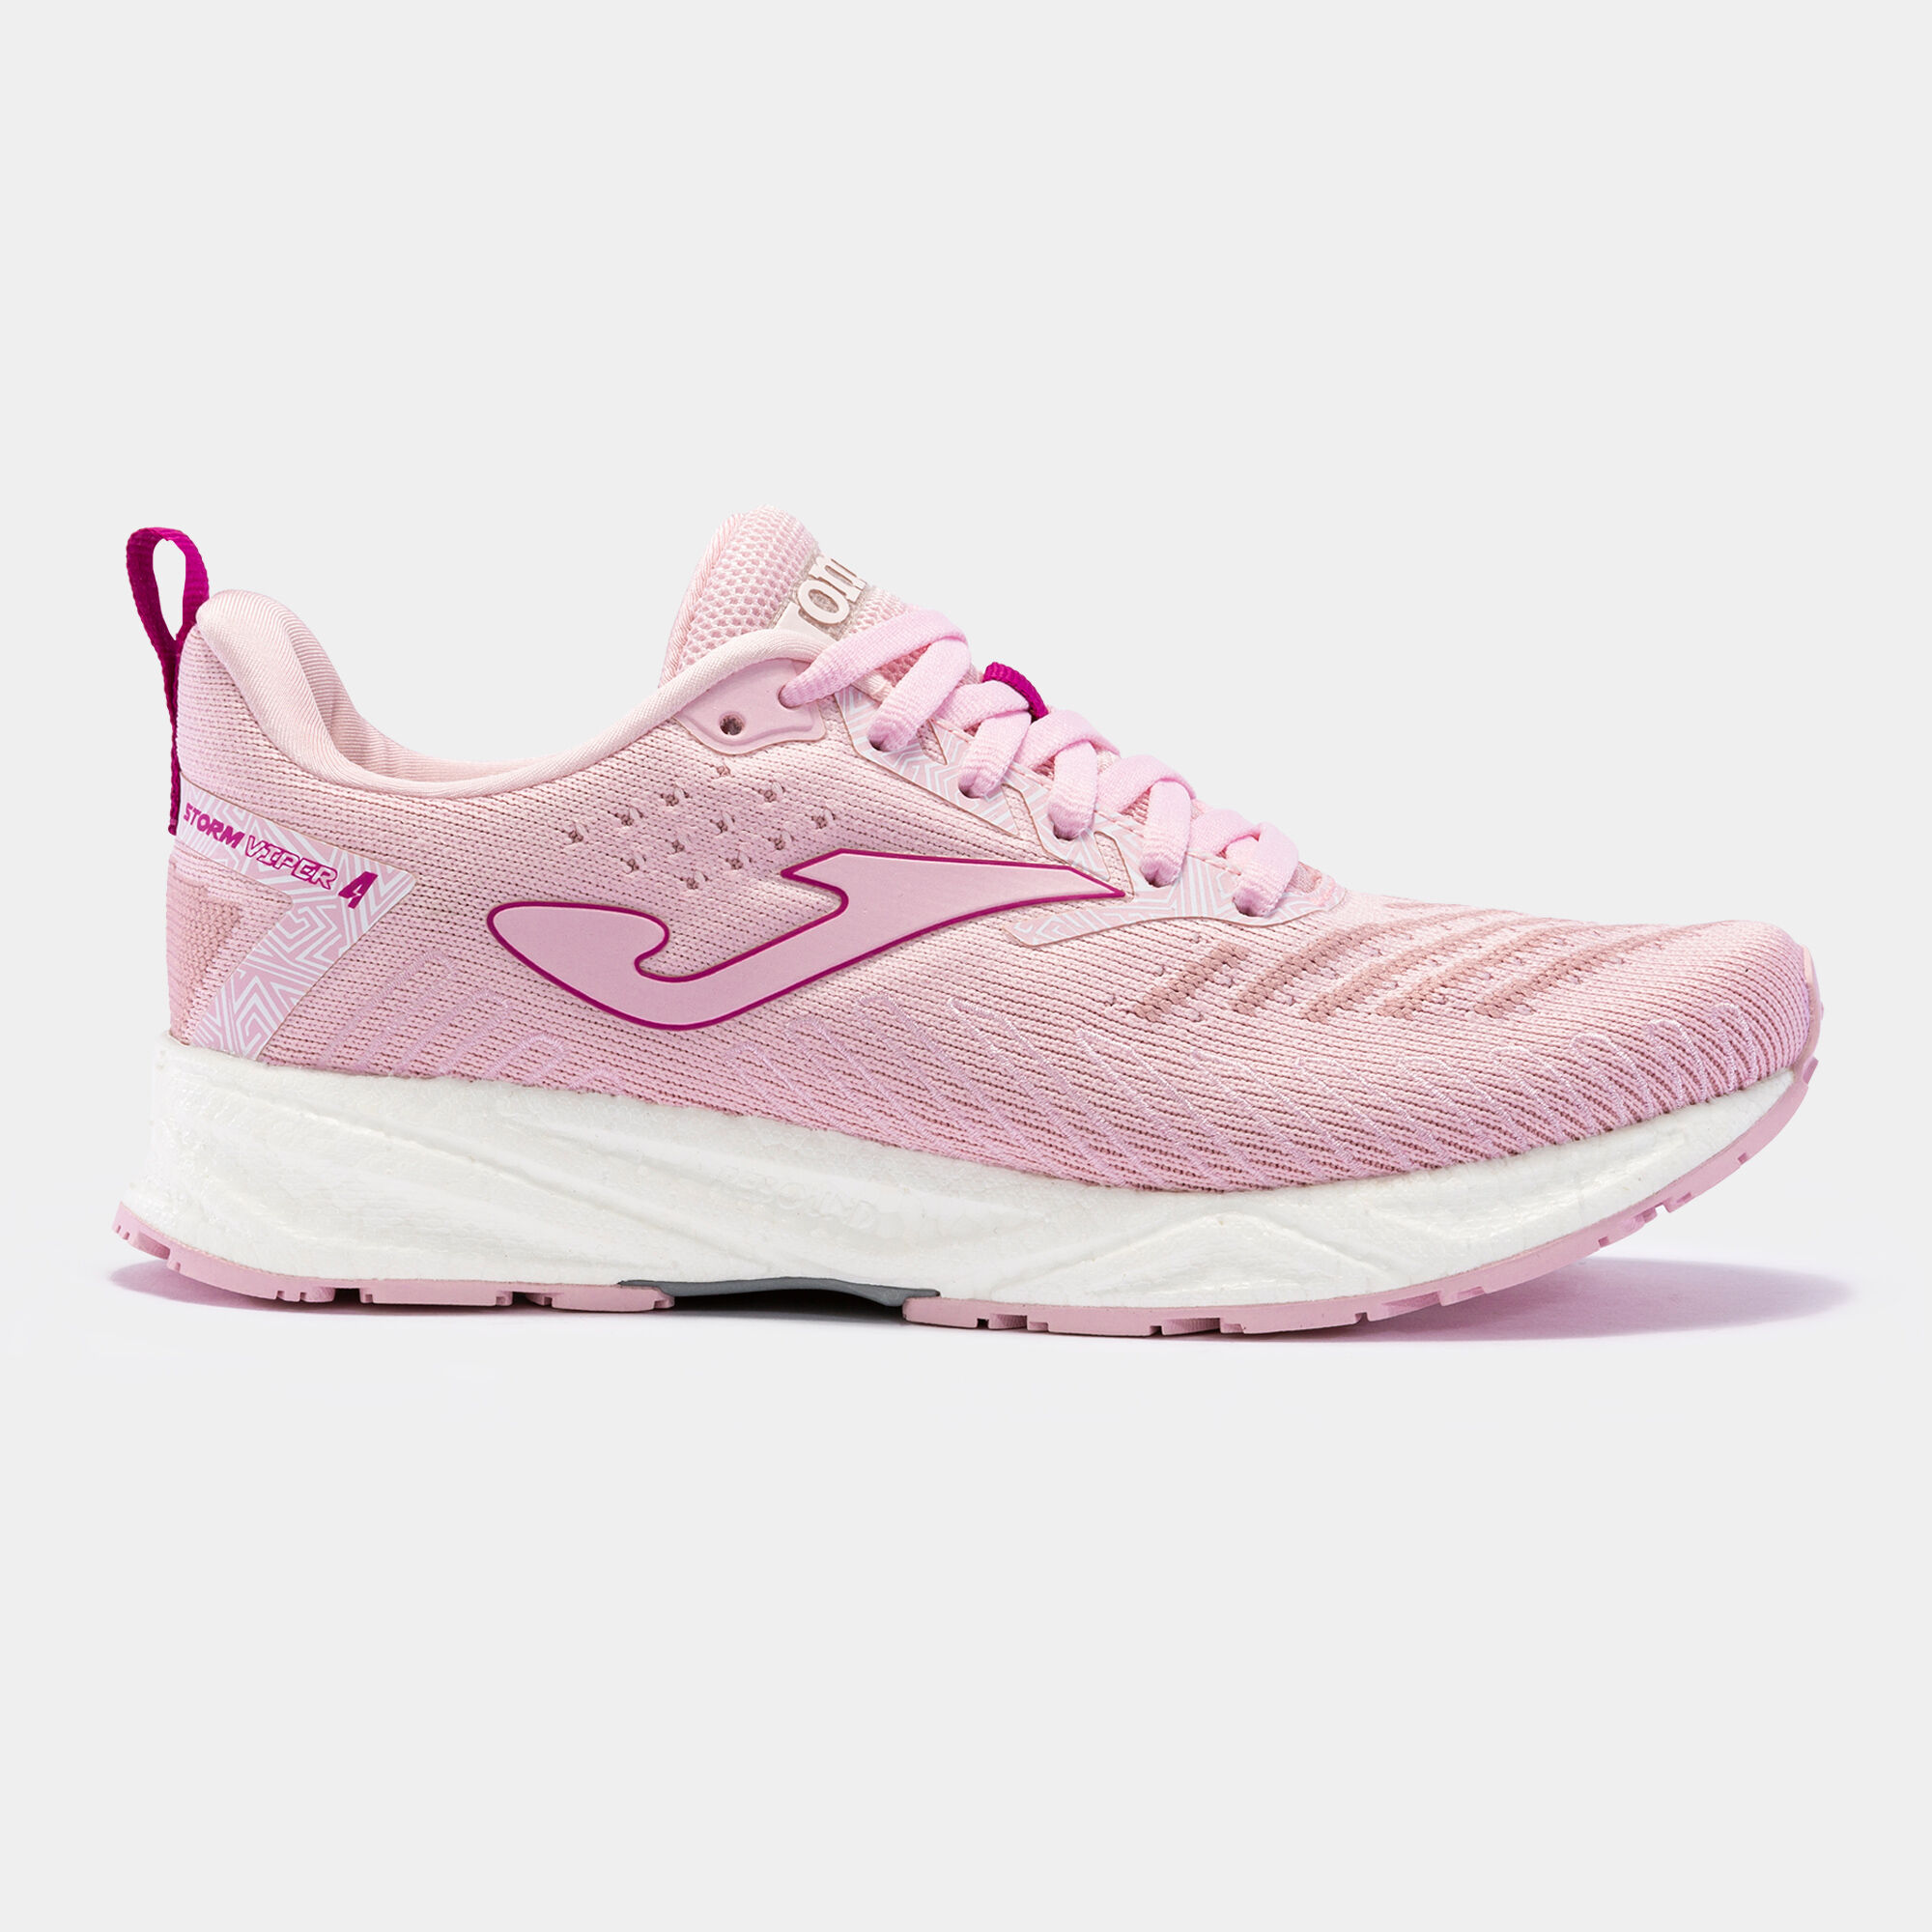 RUNNING SHOES VIPER 22 WOMAN PINK PURPLE